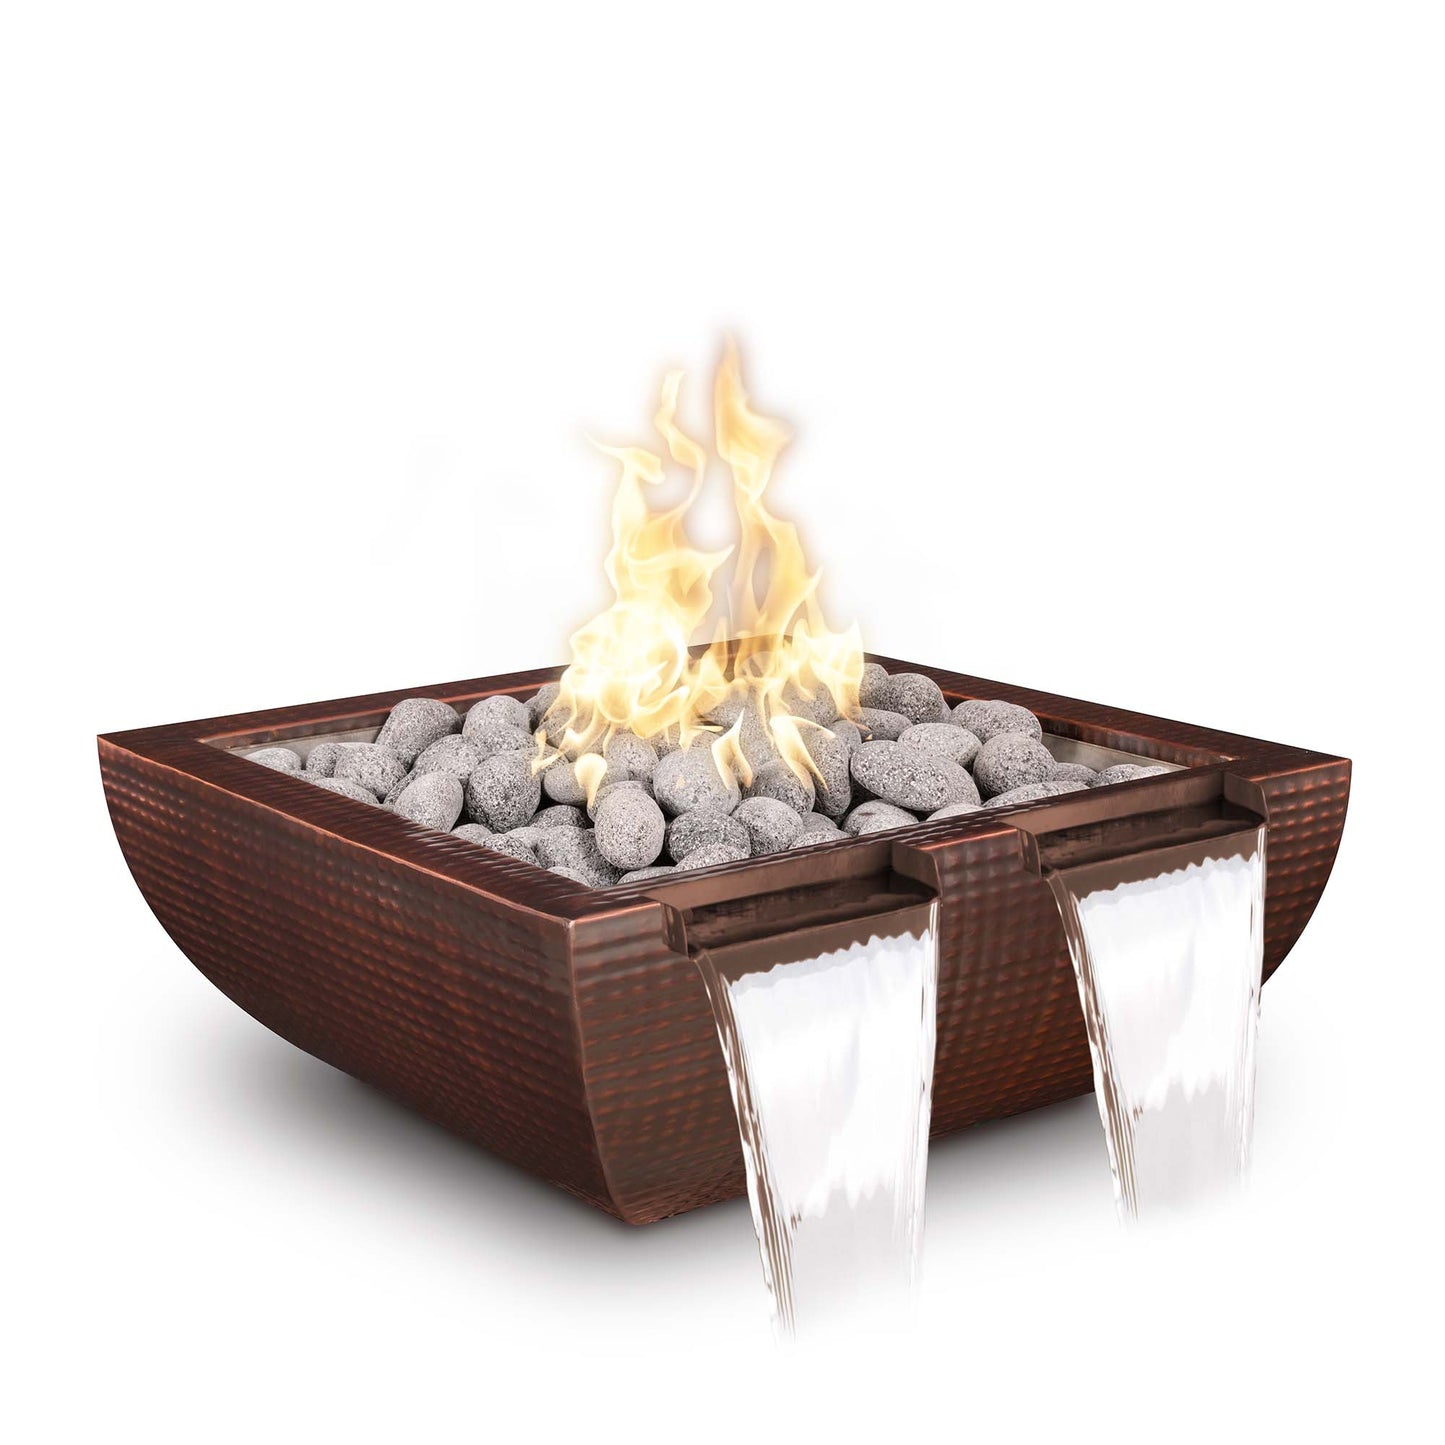 The Outdoor Plus Avalon Twin Spill 30" Gray Powder Coated Metal Natural Gas Fire & Water Bowl with Match Lit with Flame Sense Ignition